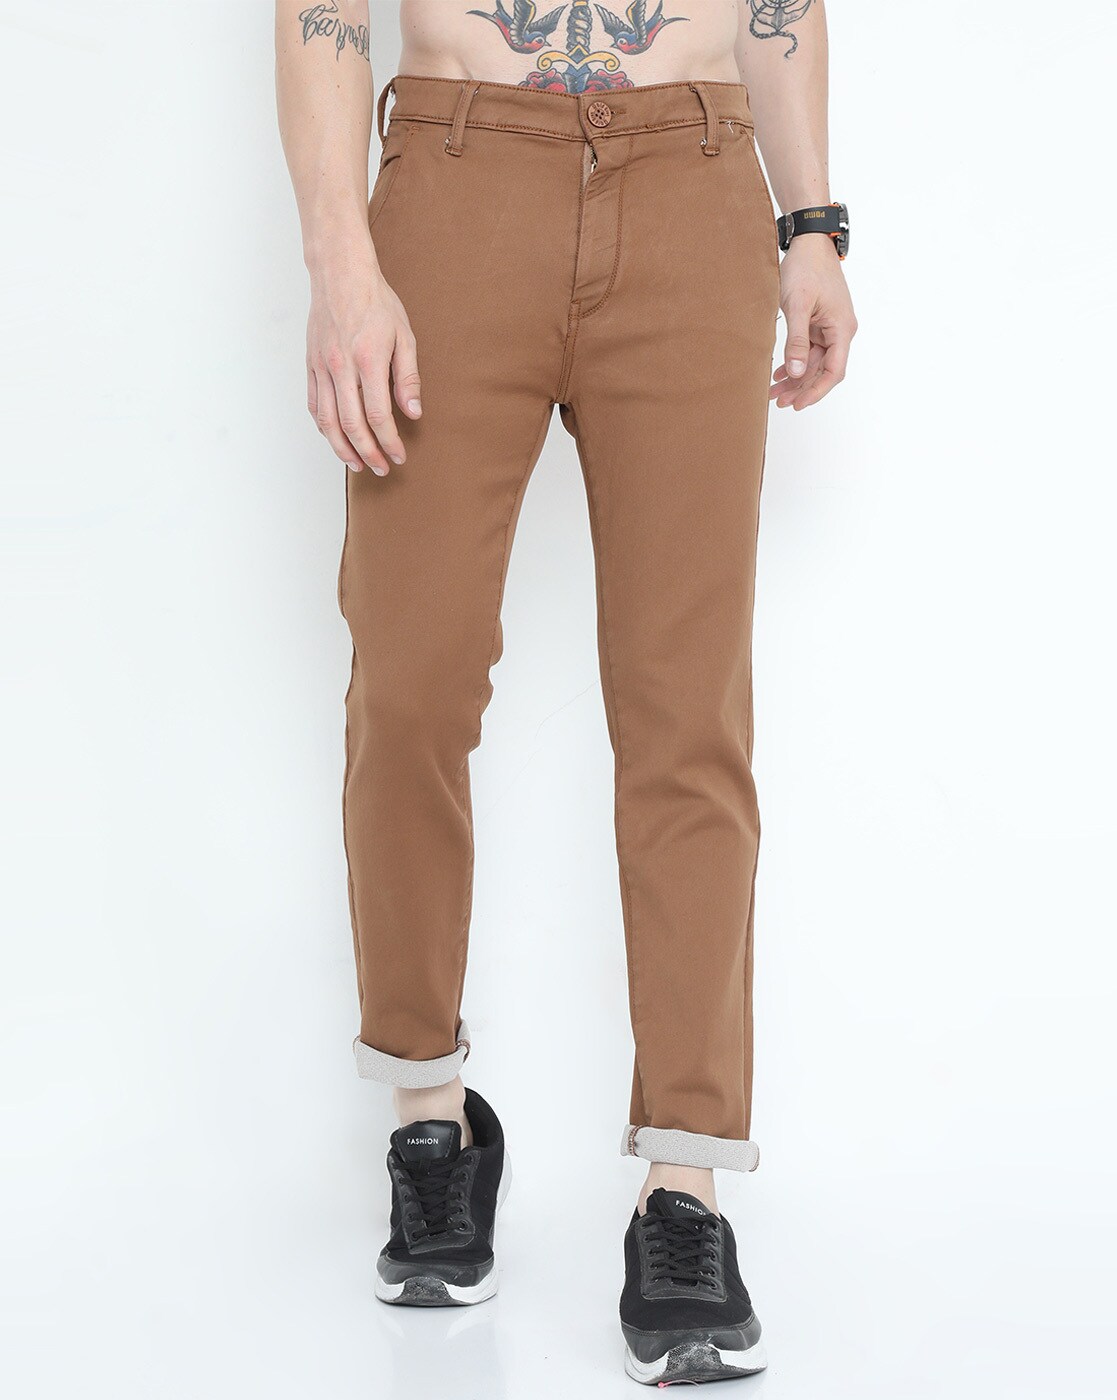 Buy Regular Trouser Brown Cotton for Best Price Reviews Free Shipping